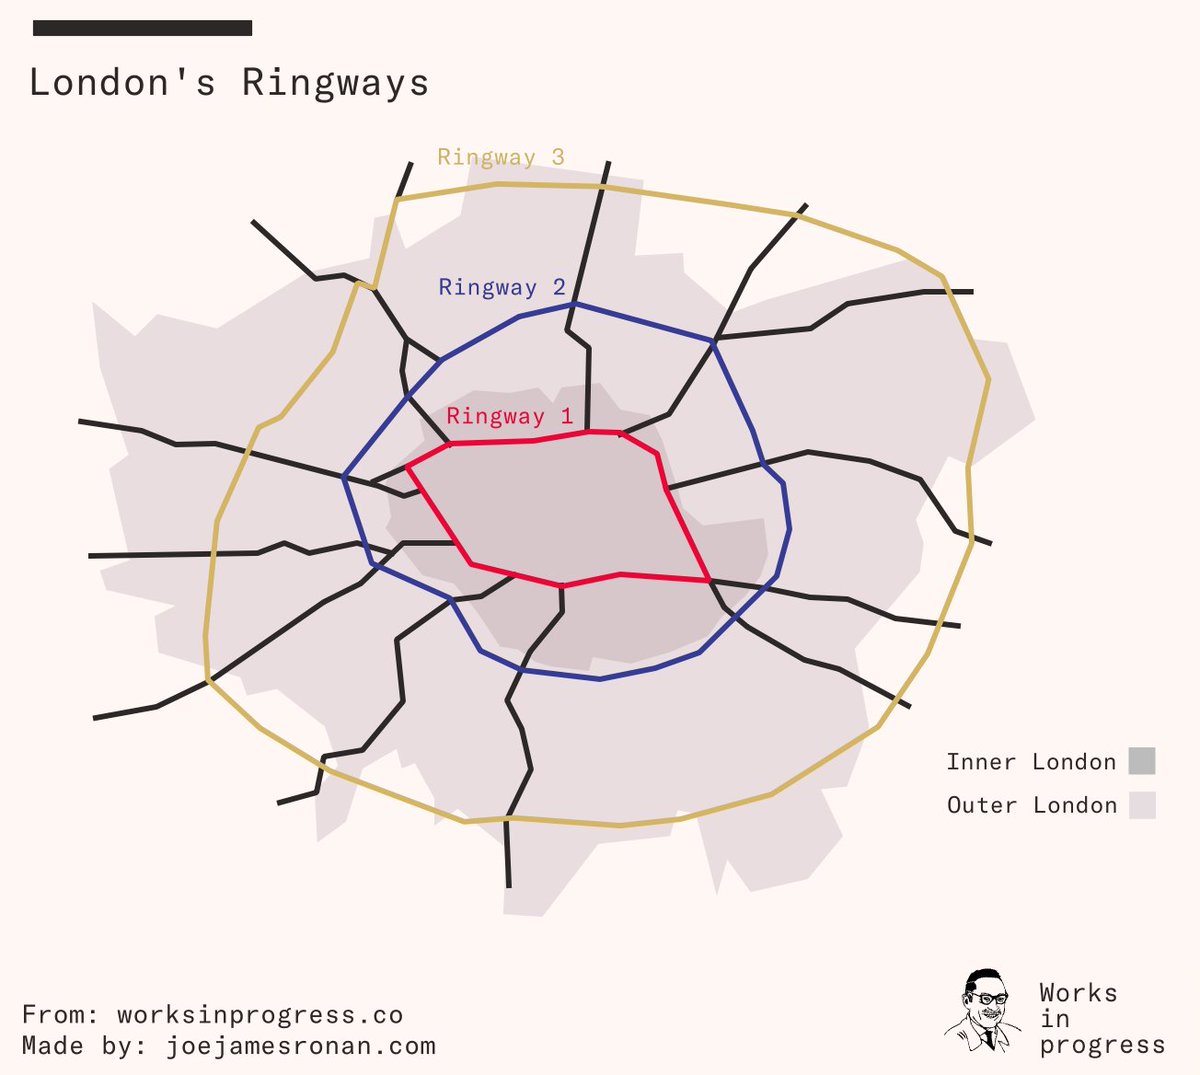 Faced with what looked like a traffic disaster, the Greater London Council designed a system of three Ringways to handle the traffic and revitalize London's urban life. 478 miles of motorway were planned that would fundamentally transform London.